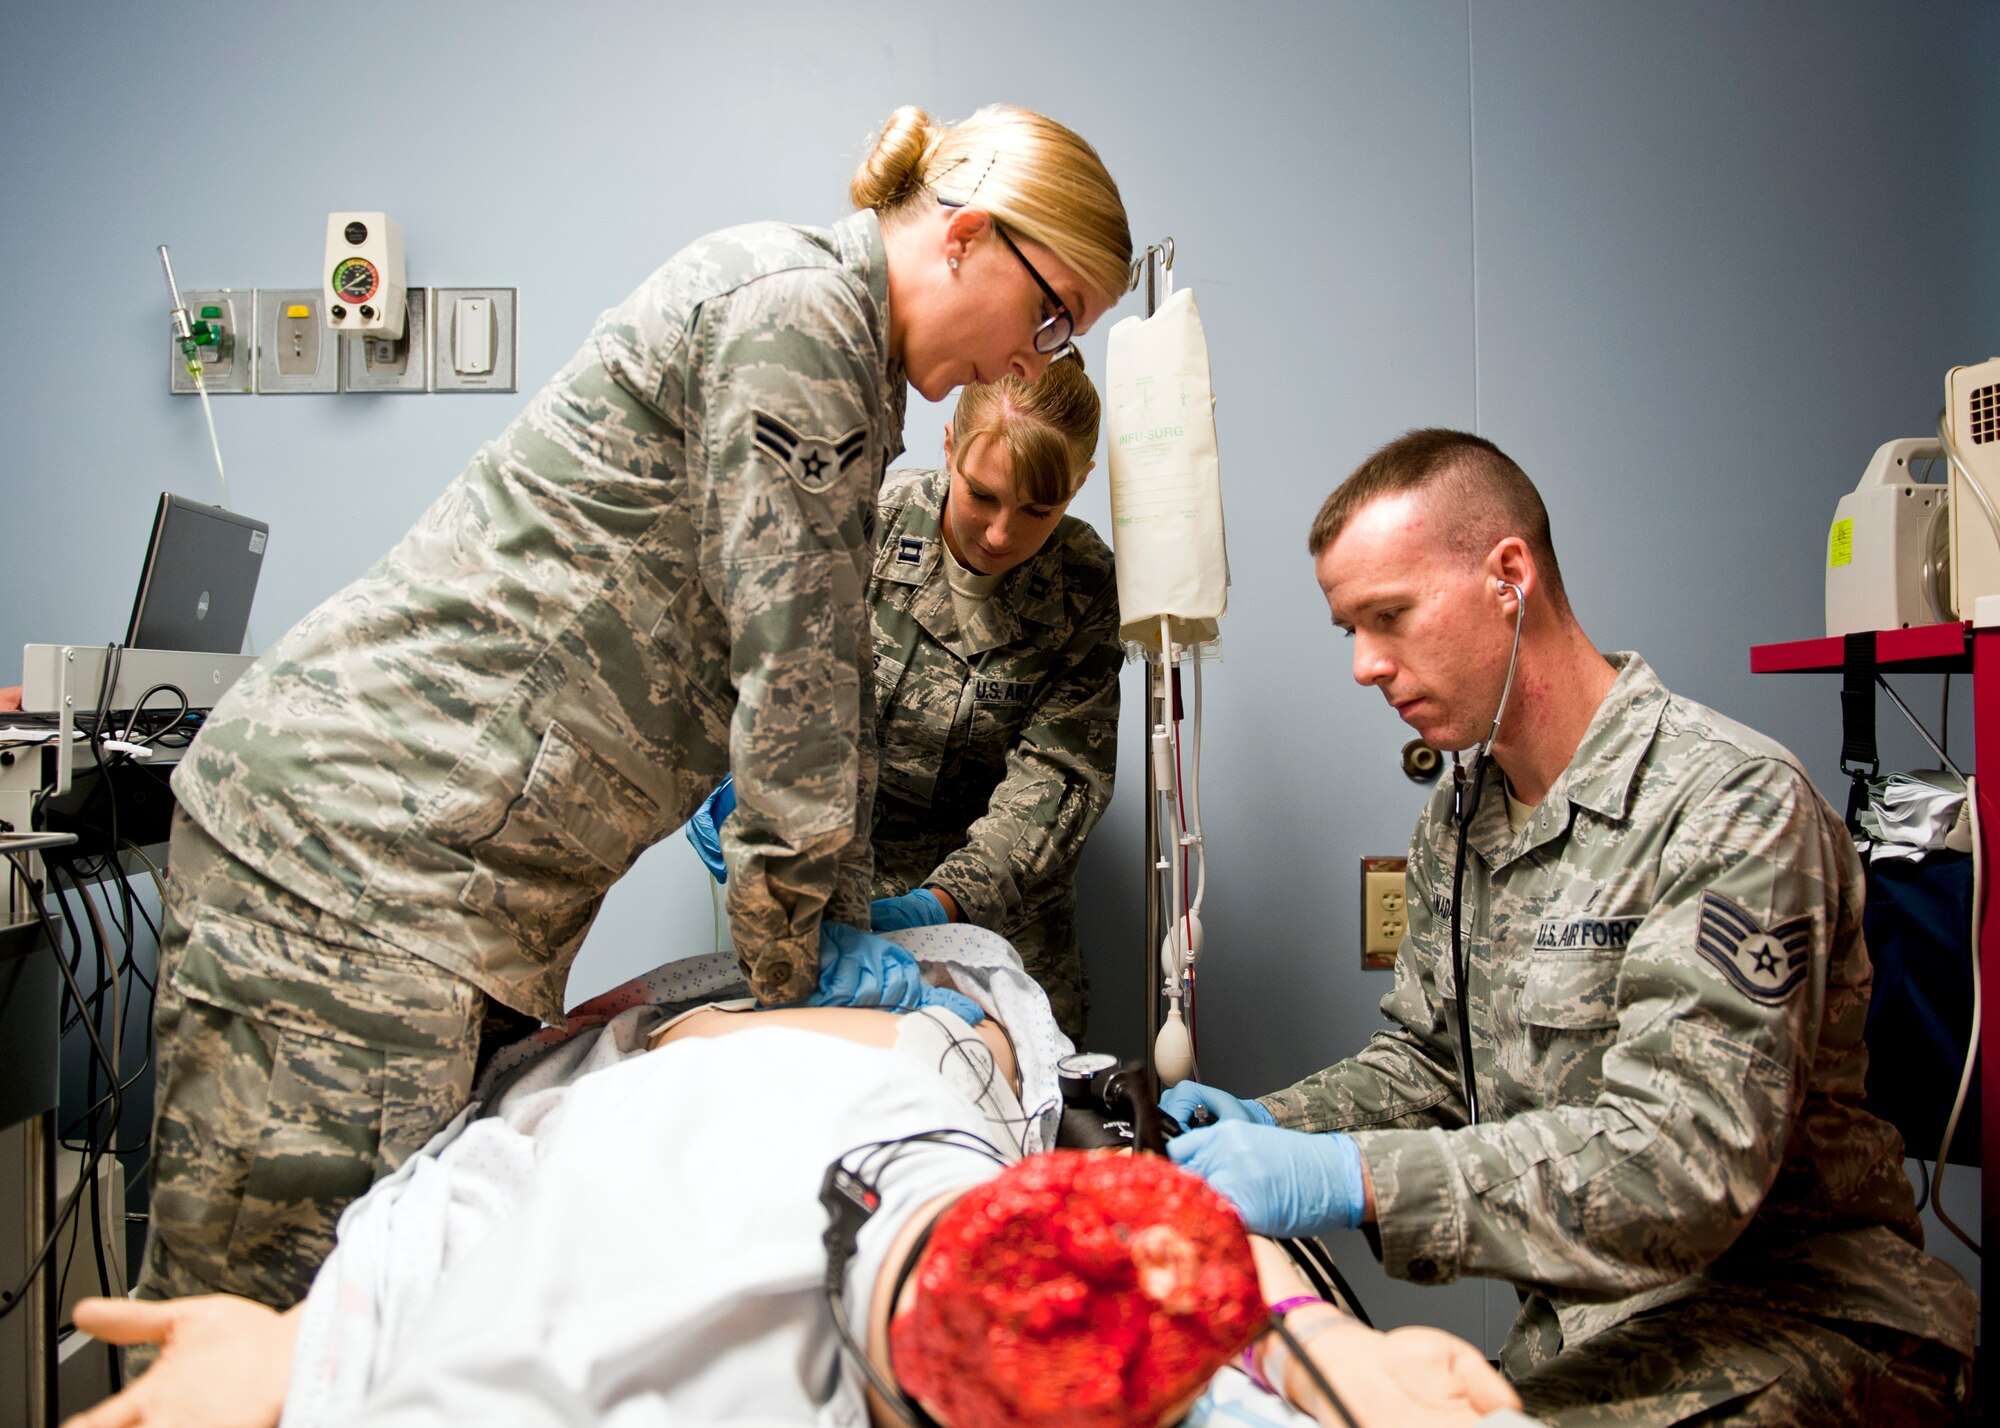 39th Medical Operations Squadron members Airman 1st Class Valerie Essman, ambulance serviceman, Capt. Rachel Rhodes, clinical nurse, and Staff Sgt. Jeremy Canady, medical technician, perform emergency care on a Sim Man medical dummy June 19, 2013, at Incirlik Air Base, Turkey. The Sim Man is capable of simulating various traumas for training purposes. (U.S. Air Force photo by Senior Airman Daniel Phelps/Released)